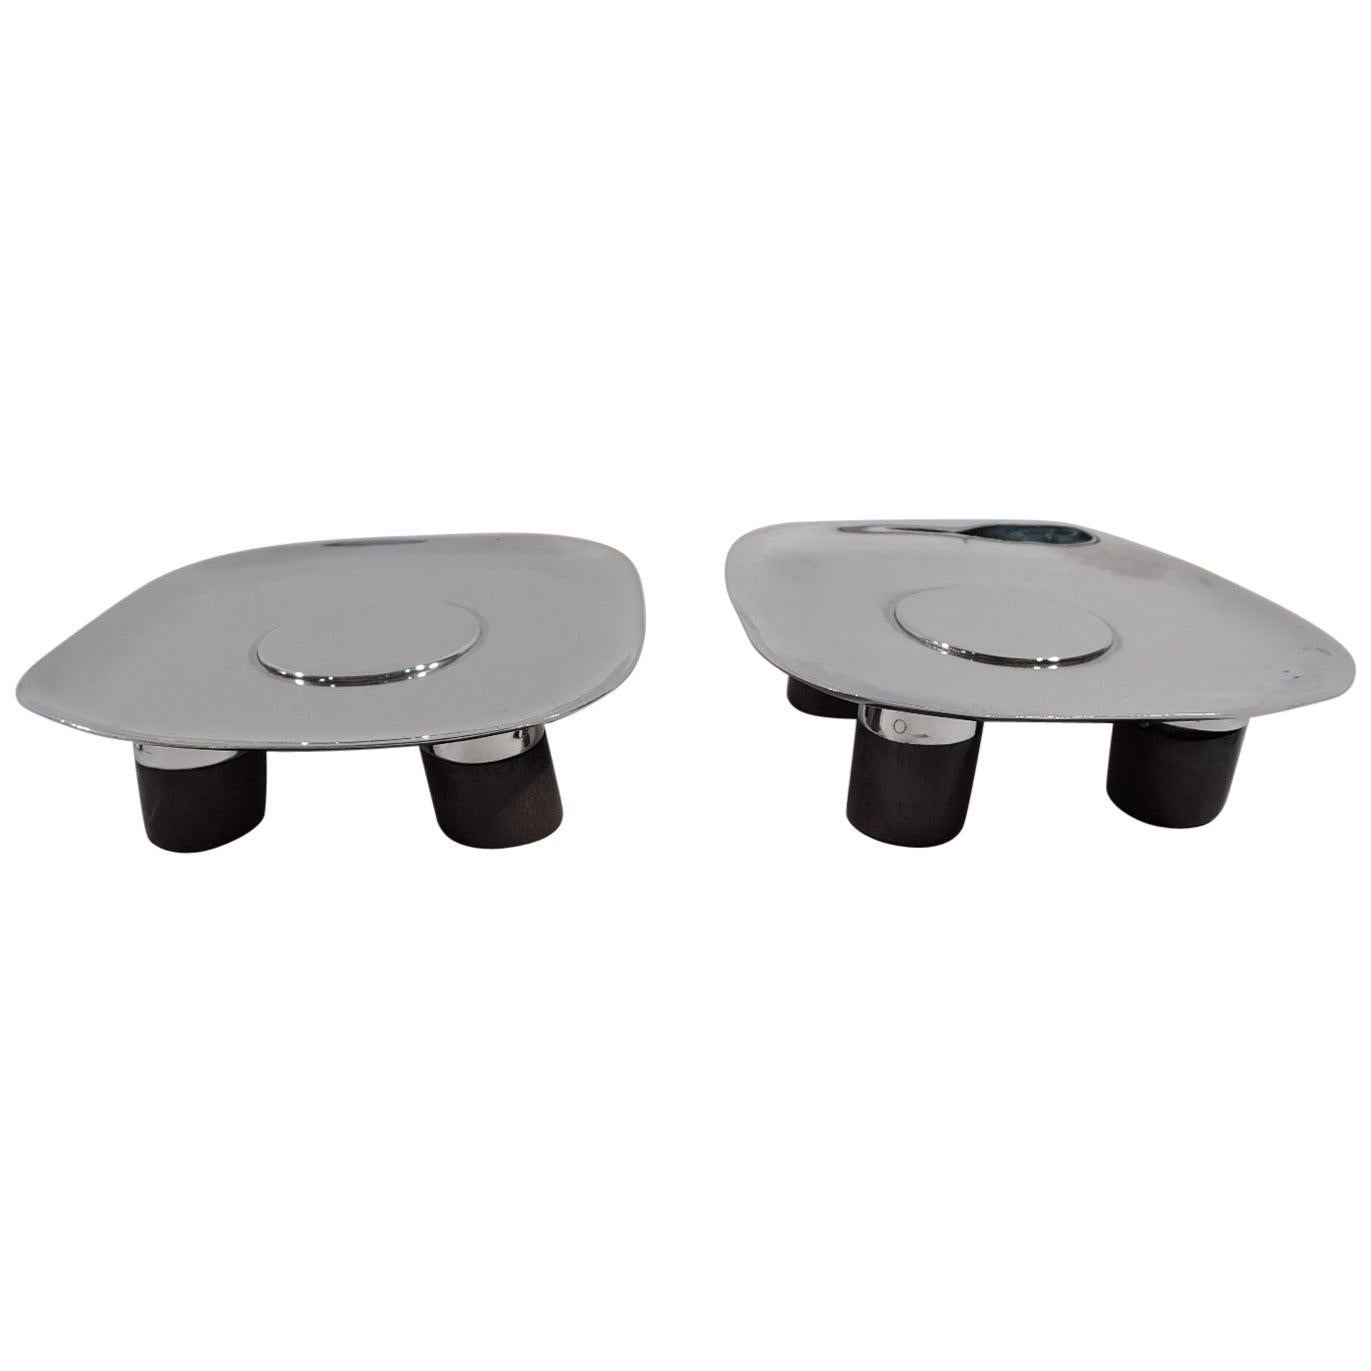 Including:

Cartier Modern Sterling Silver Serving Tray , 11 , f_21119422 , Price: $1085

Pair of Spratling Mid-Century Modern Sterling Silver Footed Dishes , 1.13 x 3.63 x 3.63 , f_21412892 , Price: $775

Cartier Mid-Century Modern Sterling Silver